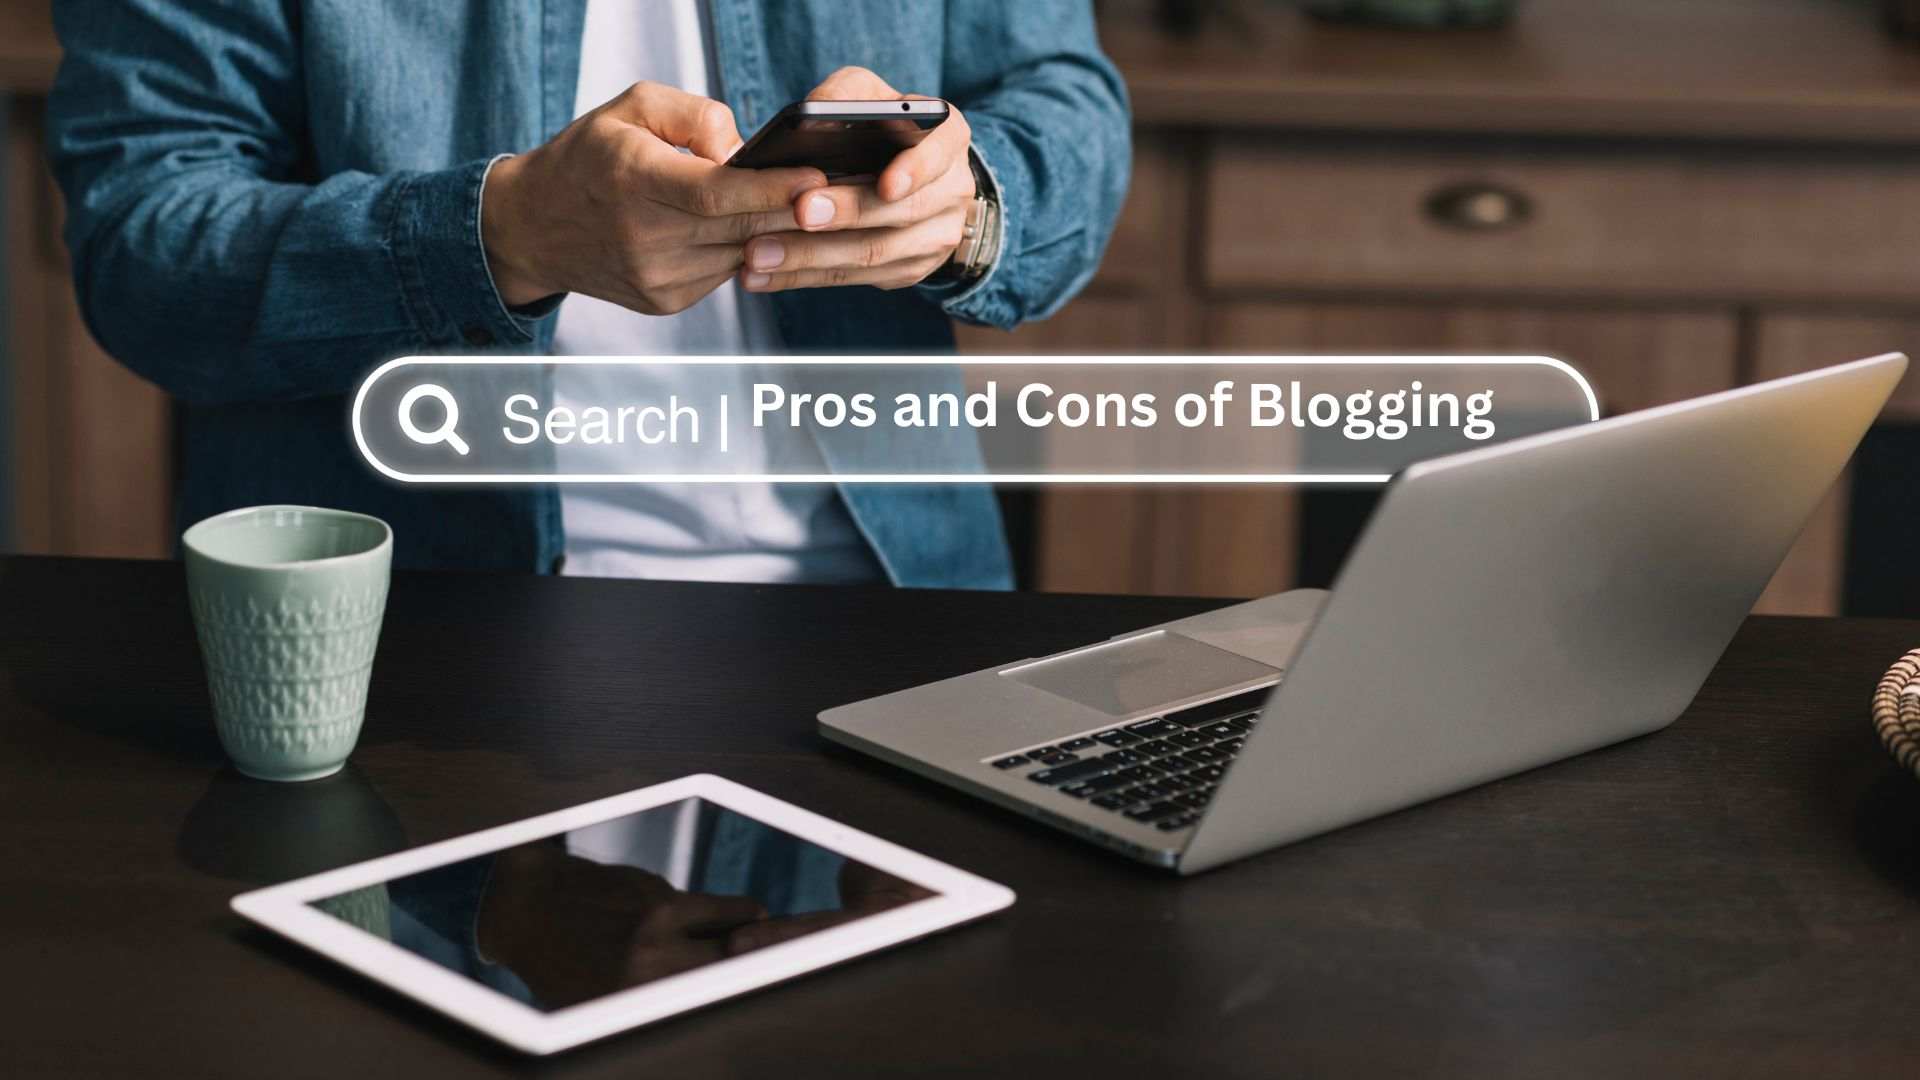 Pros and Cons of Blogging